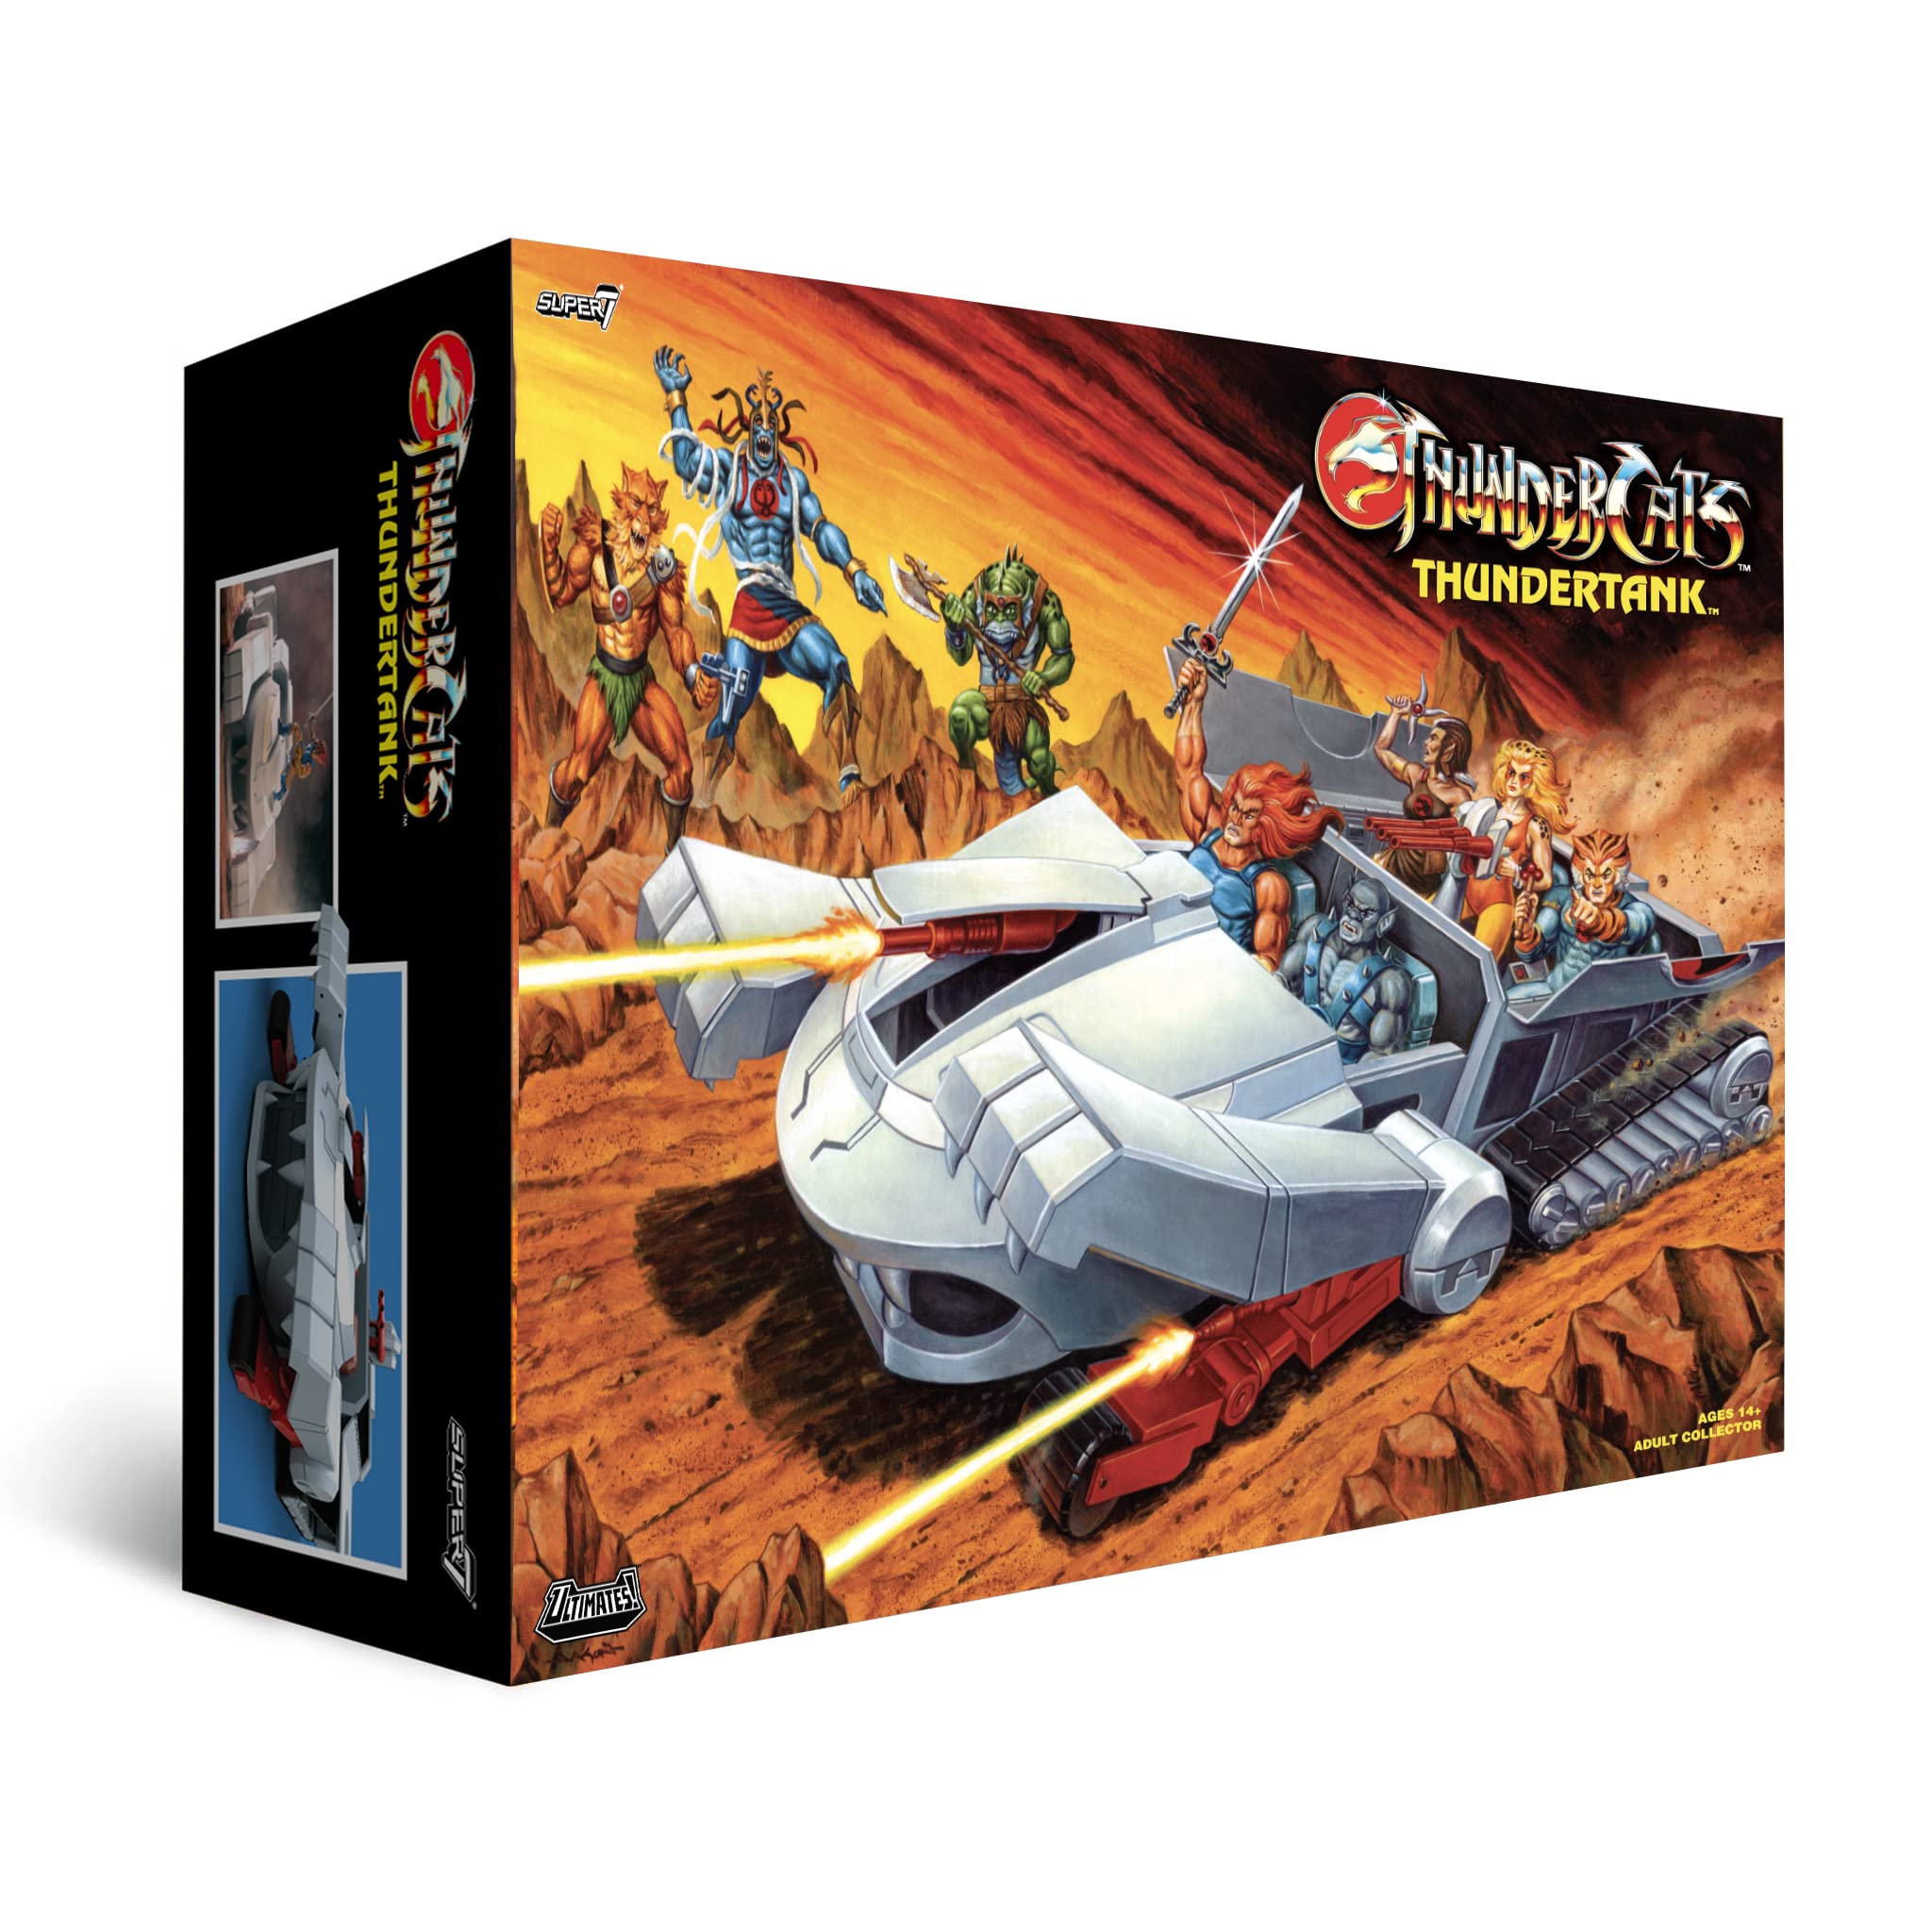 Super7 Thundercats ThunderTank - 27 in ULTIMATES! Vehicle - Features Cartoon Accurate Details, Battle Mode Transformations, and Accessories, Holds Up to Six 7in Thundercats Action Figures